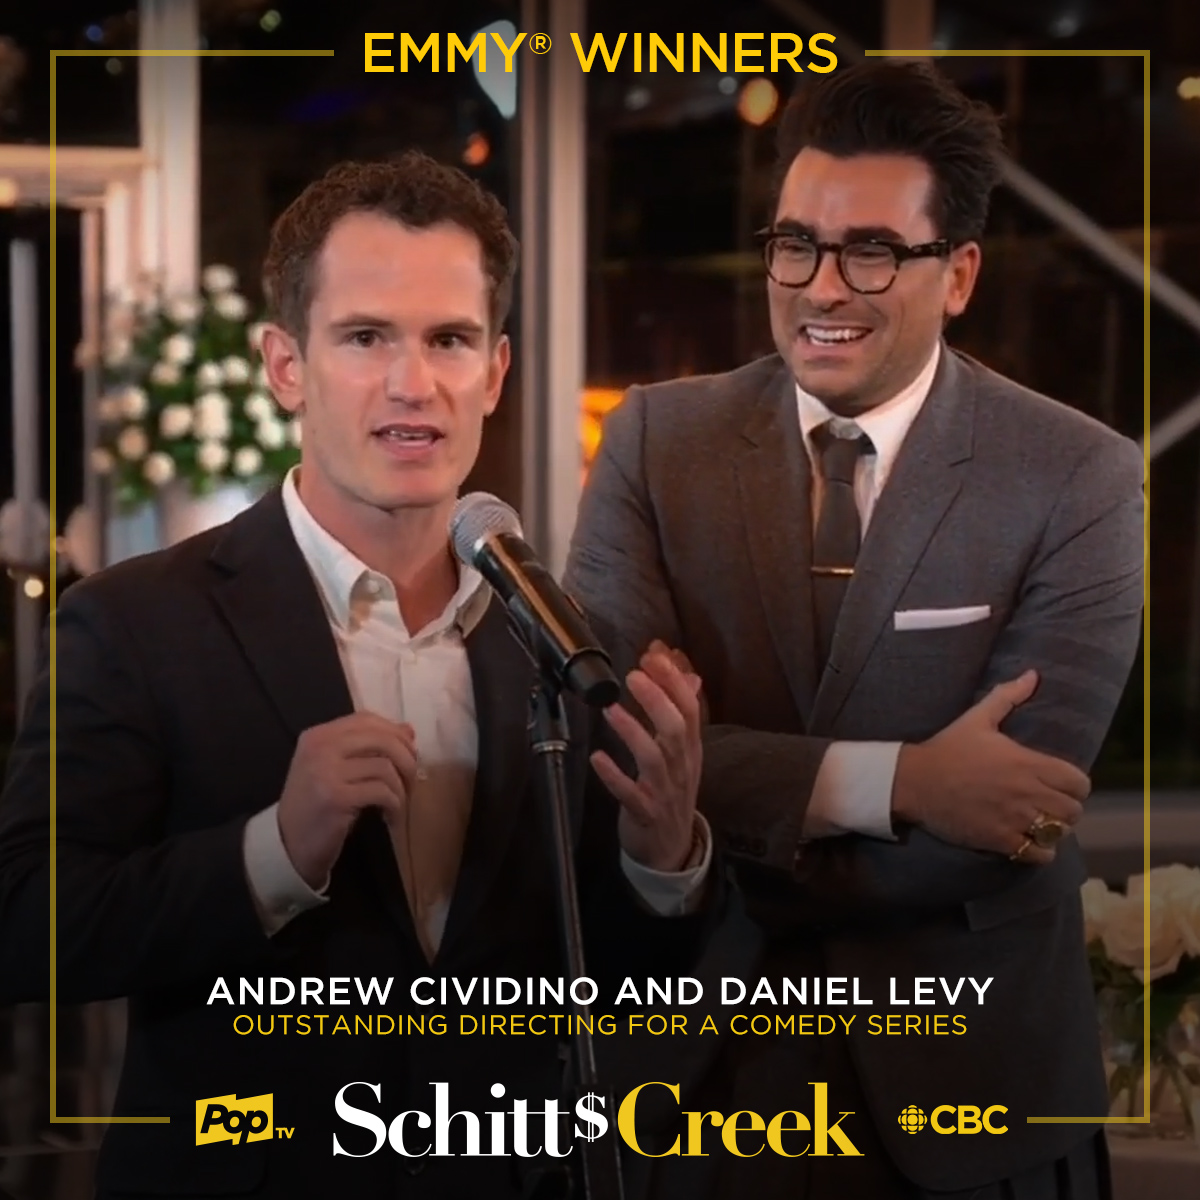 Along with congratulations to Andrew Cividino who co-directed 'Happy Ending' with Dan!  #Emmys  